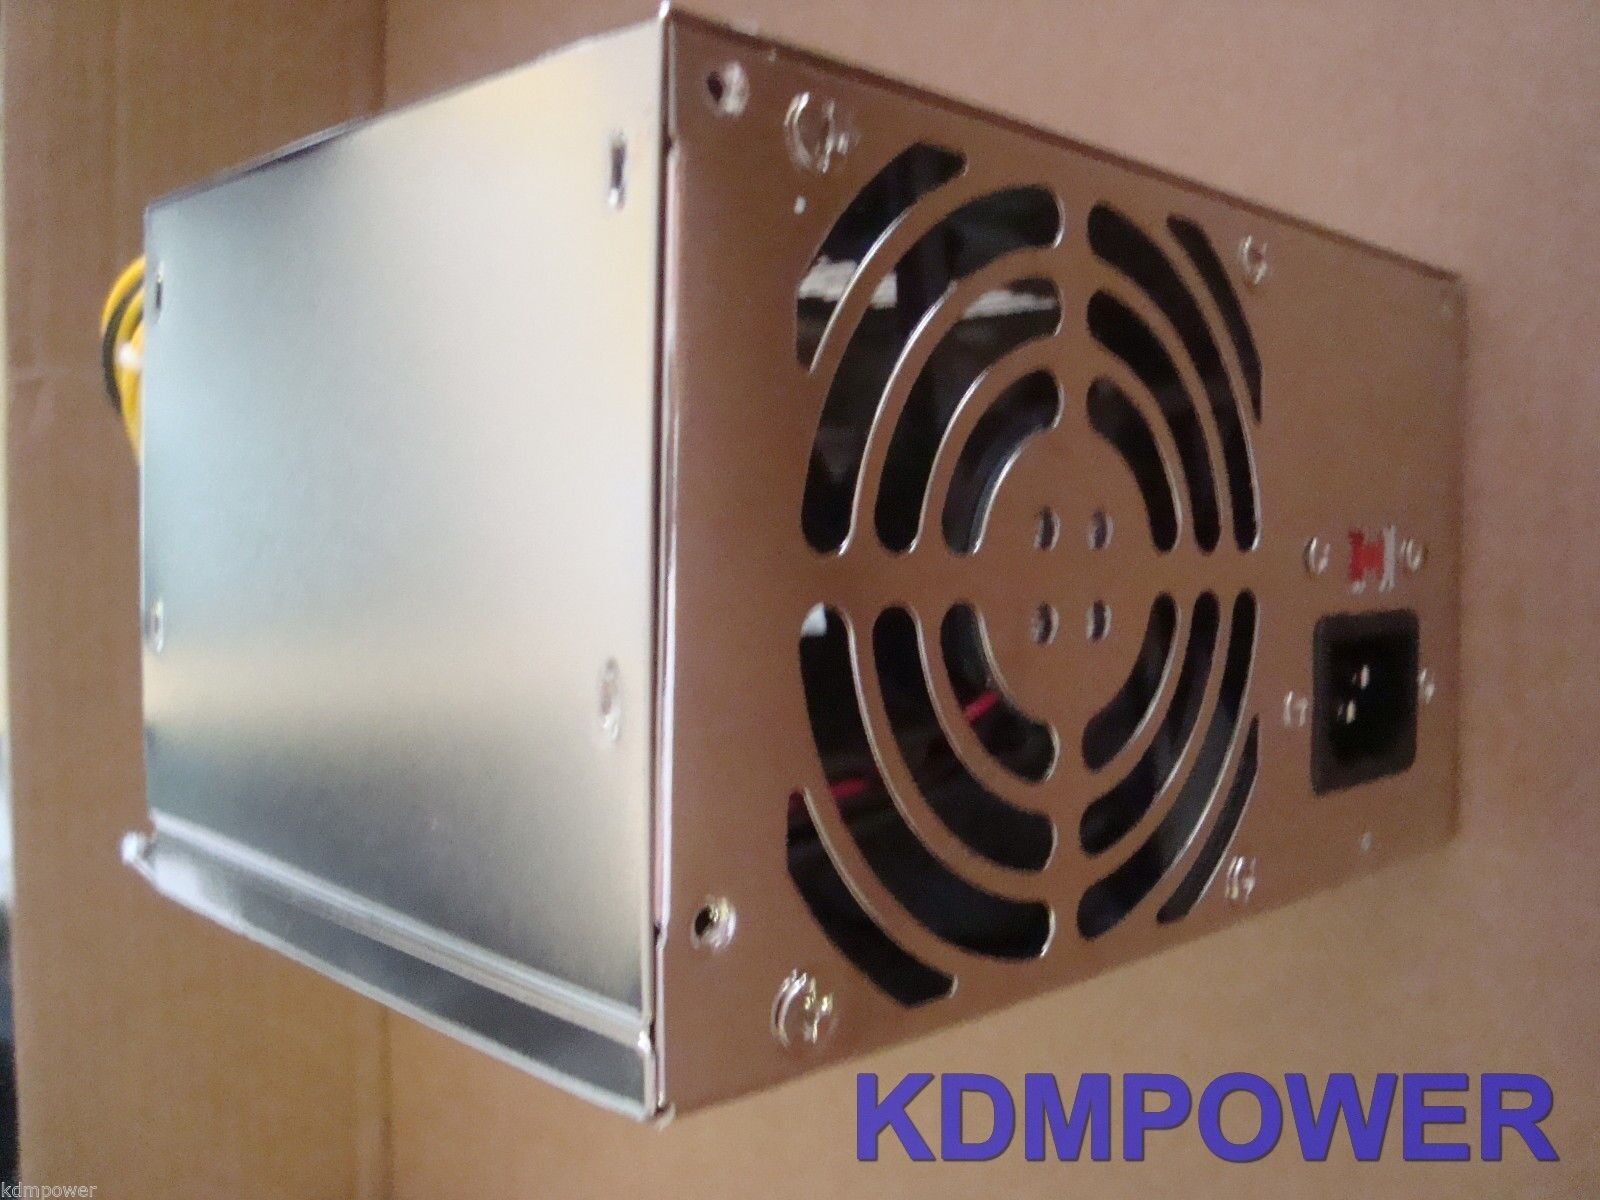 NEW 500W Lenovo IdeaCentre K450 Power Supply Replace/Upgrade 50N.10